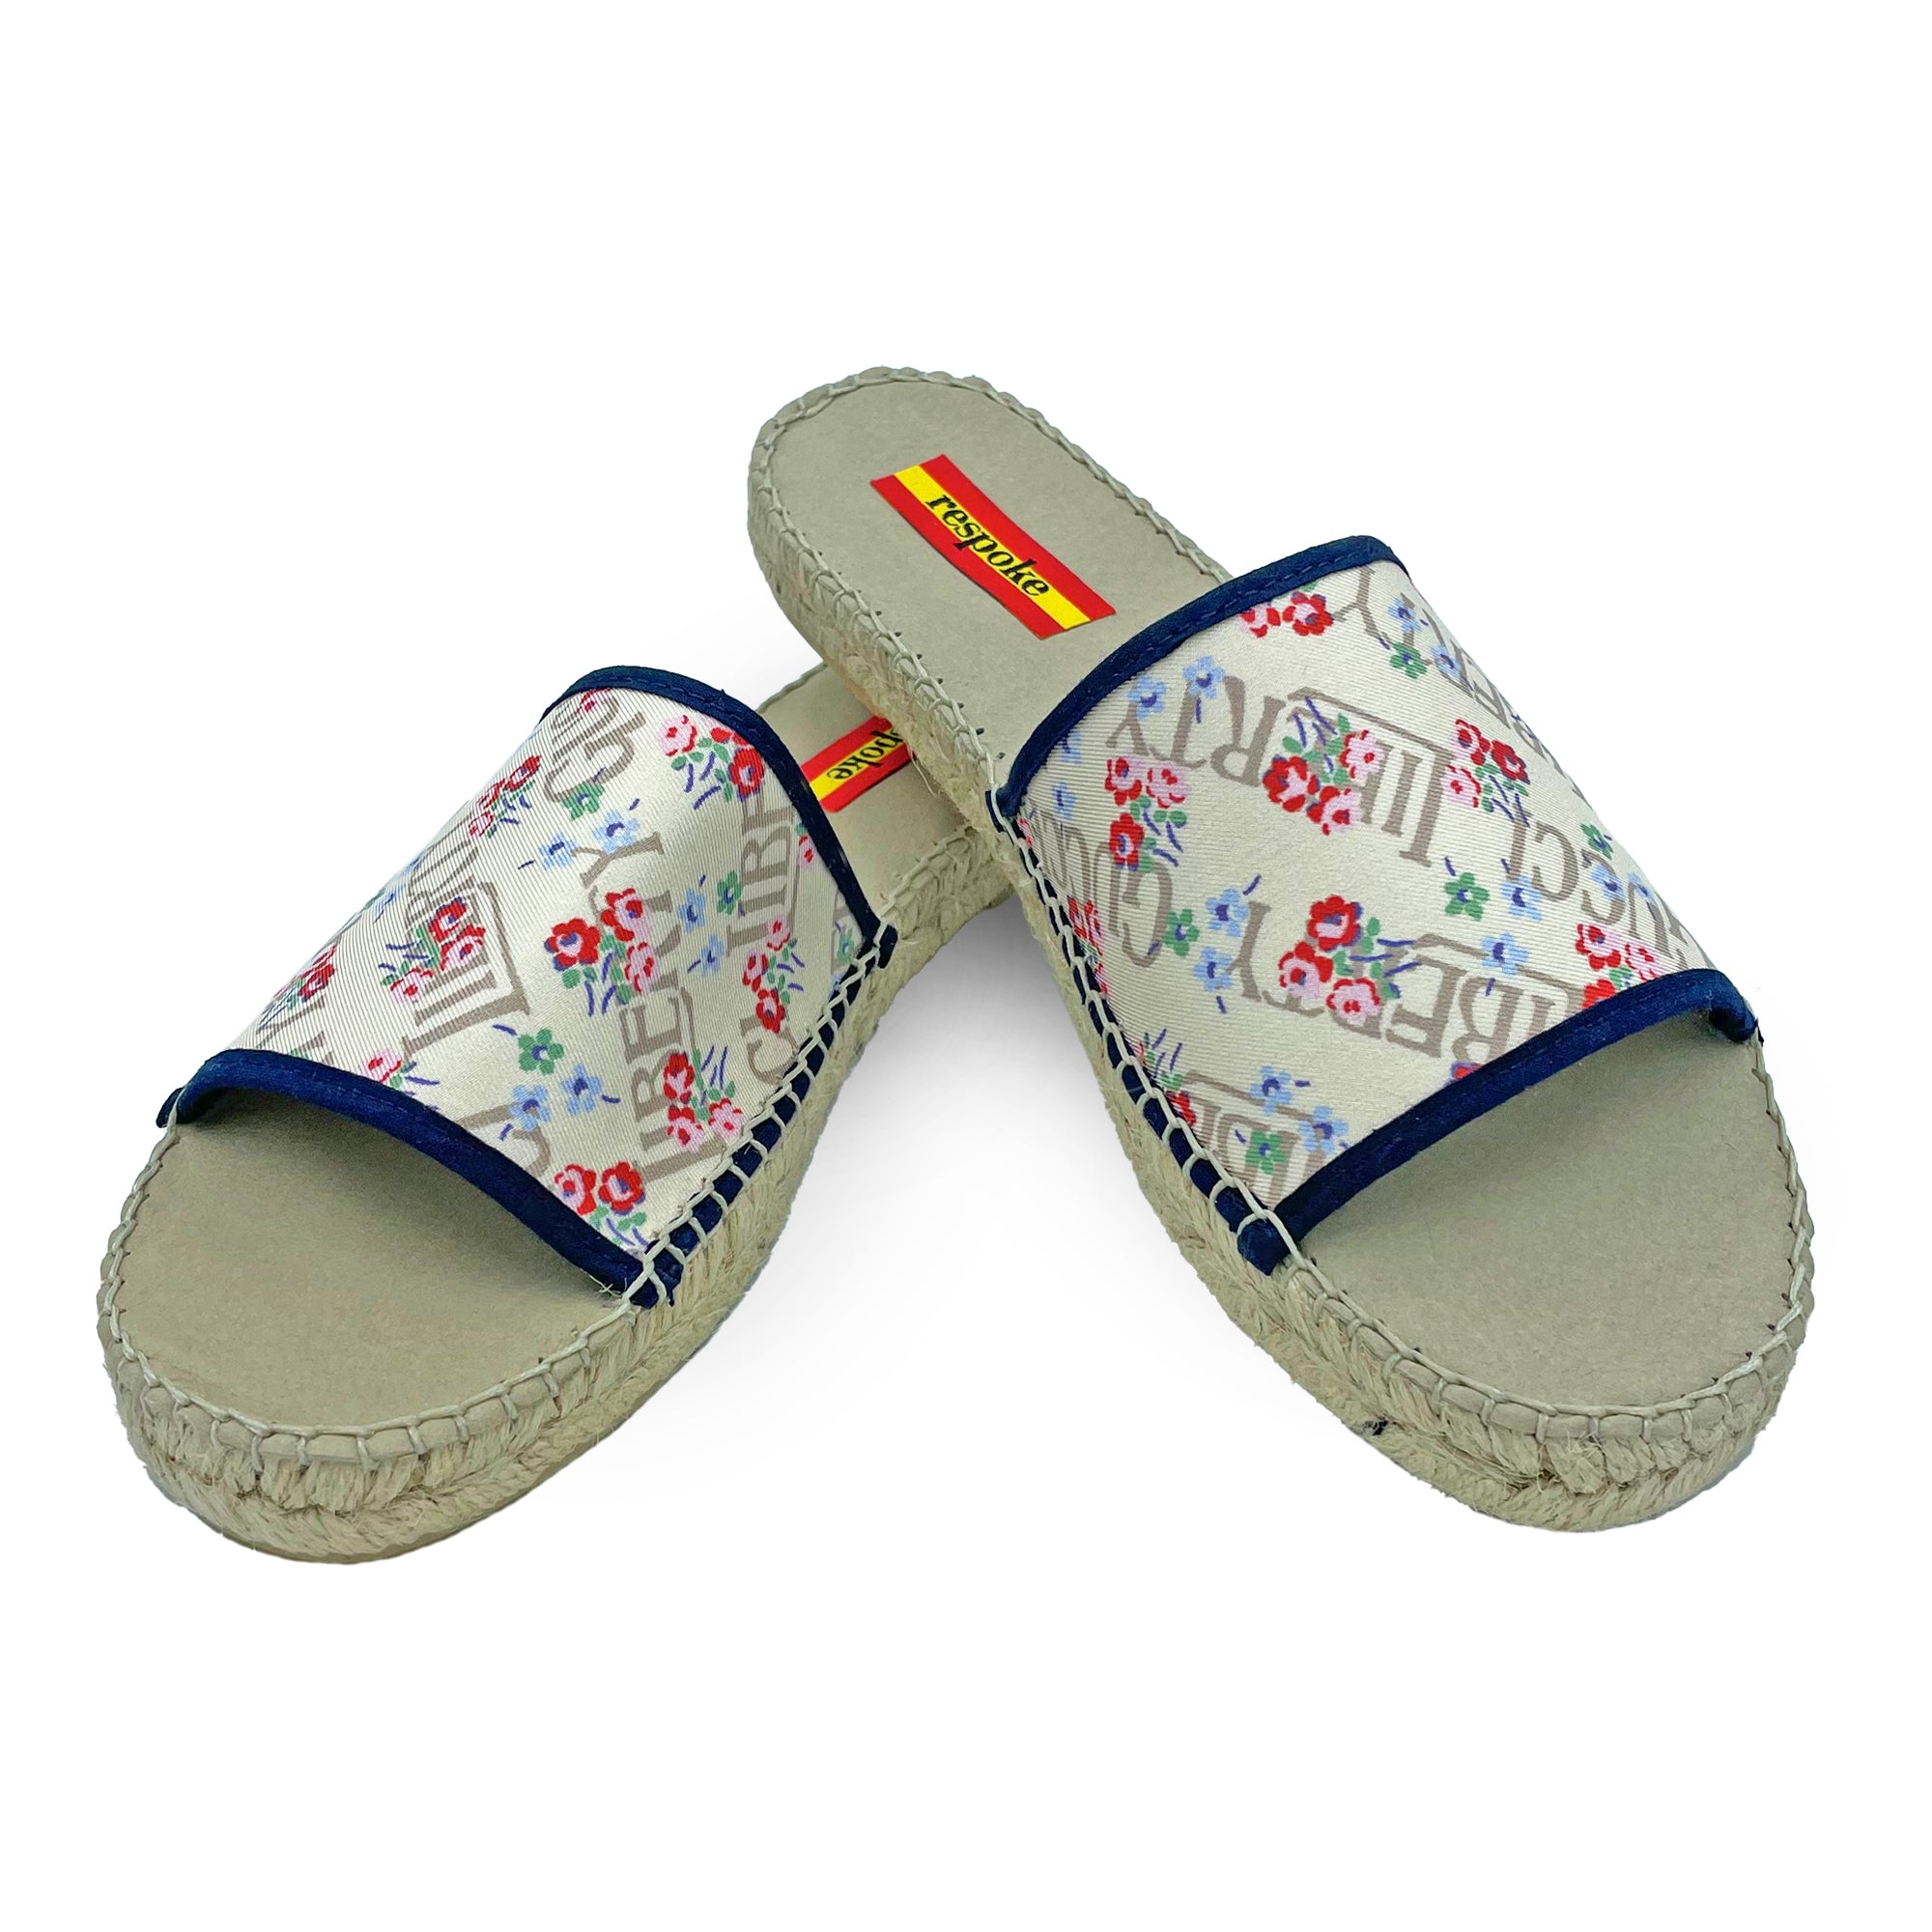 Respoke Dana Flip-Flop made from a Gucci scarf